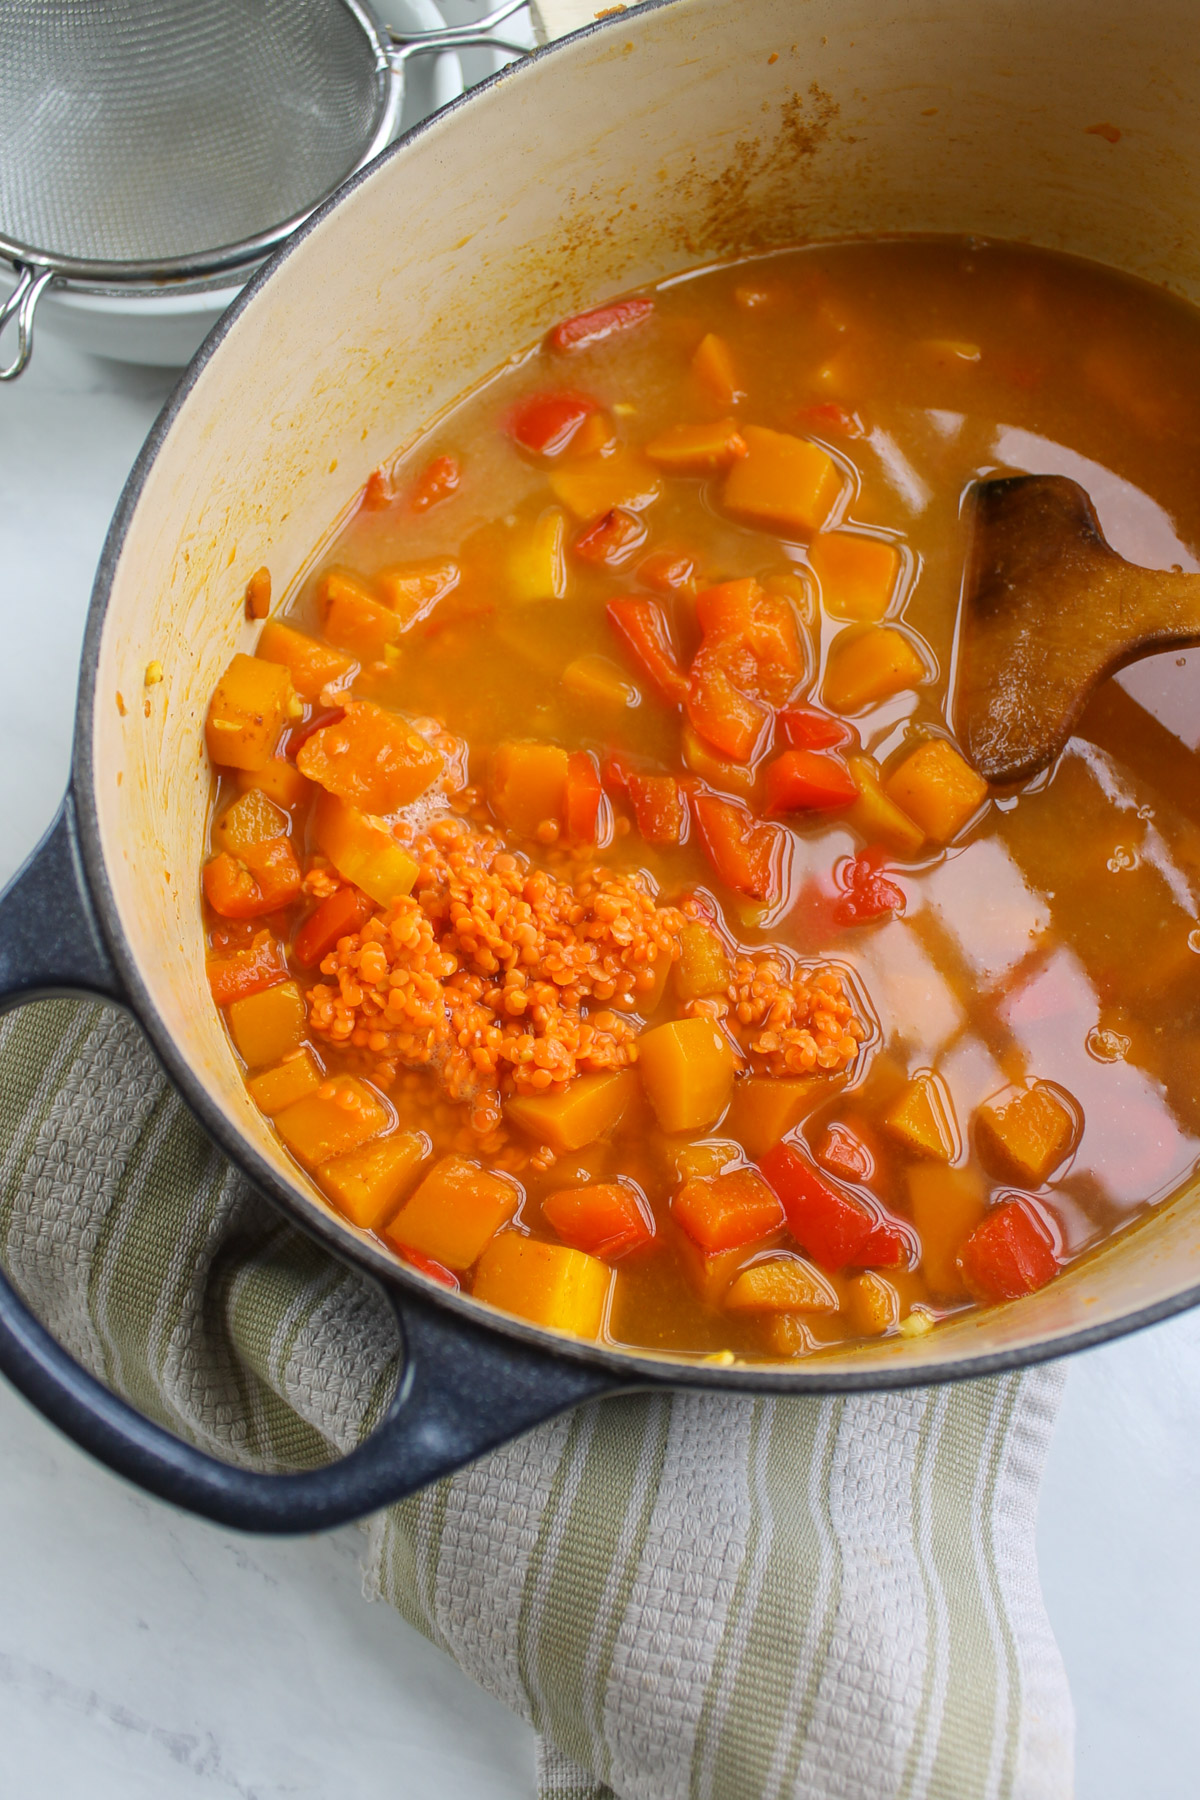 Adding red lentils to butternut squash red pepper soup.